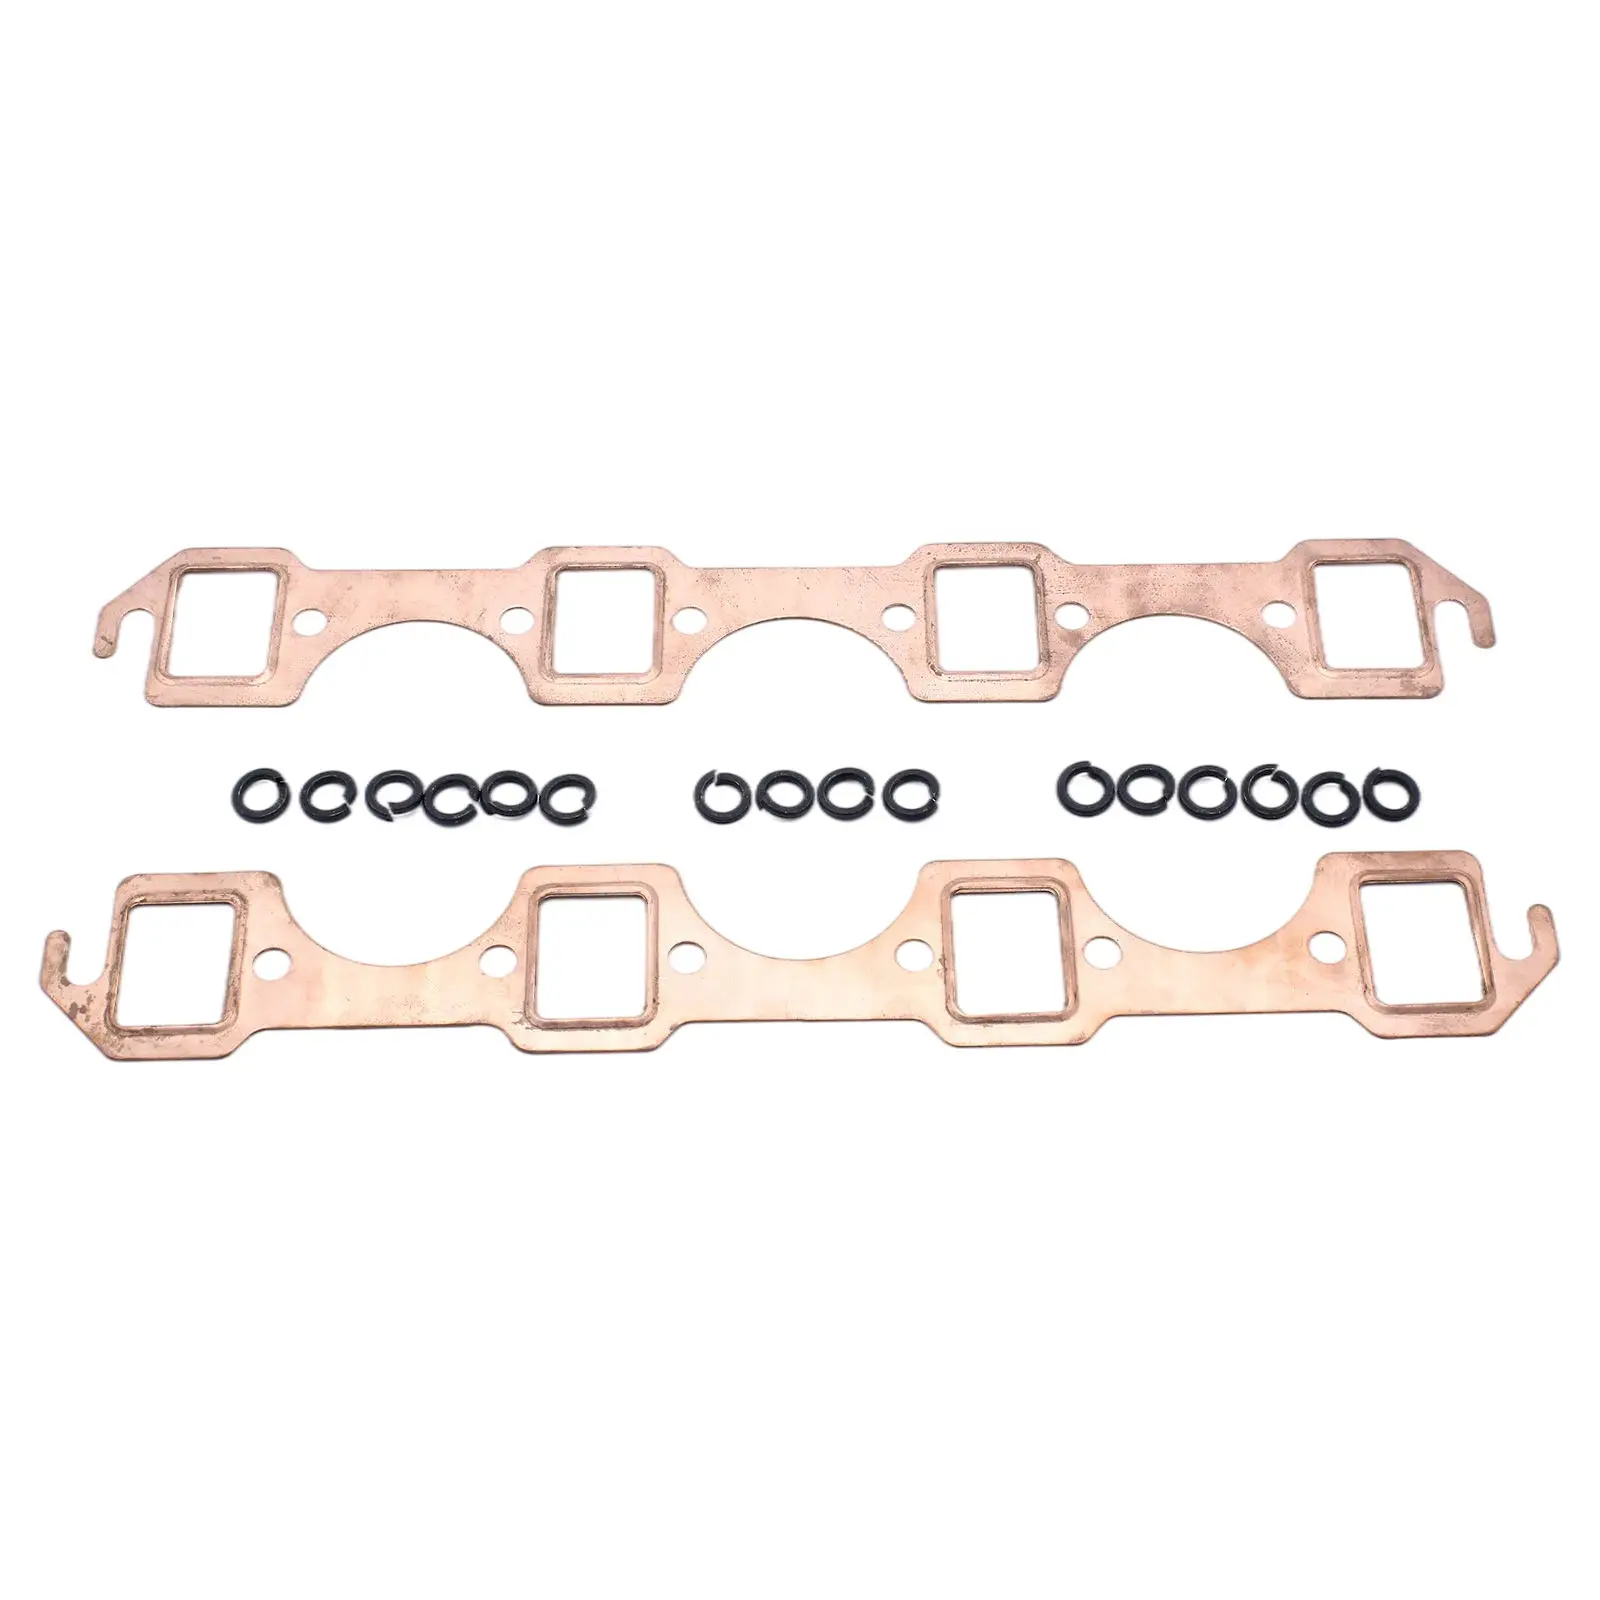 2x Exhaust Header Gaskets Square Gasket Kit Premium Fit for Ford 302 5.0L 1962-1986